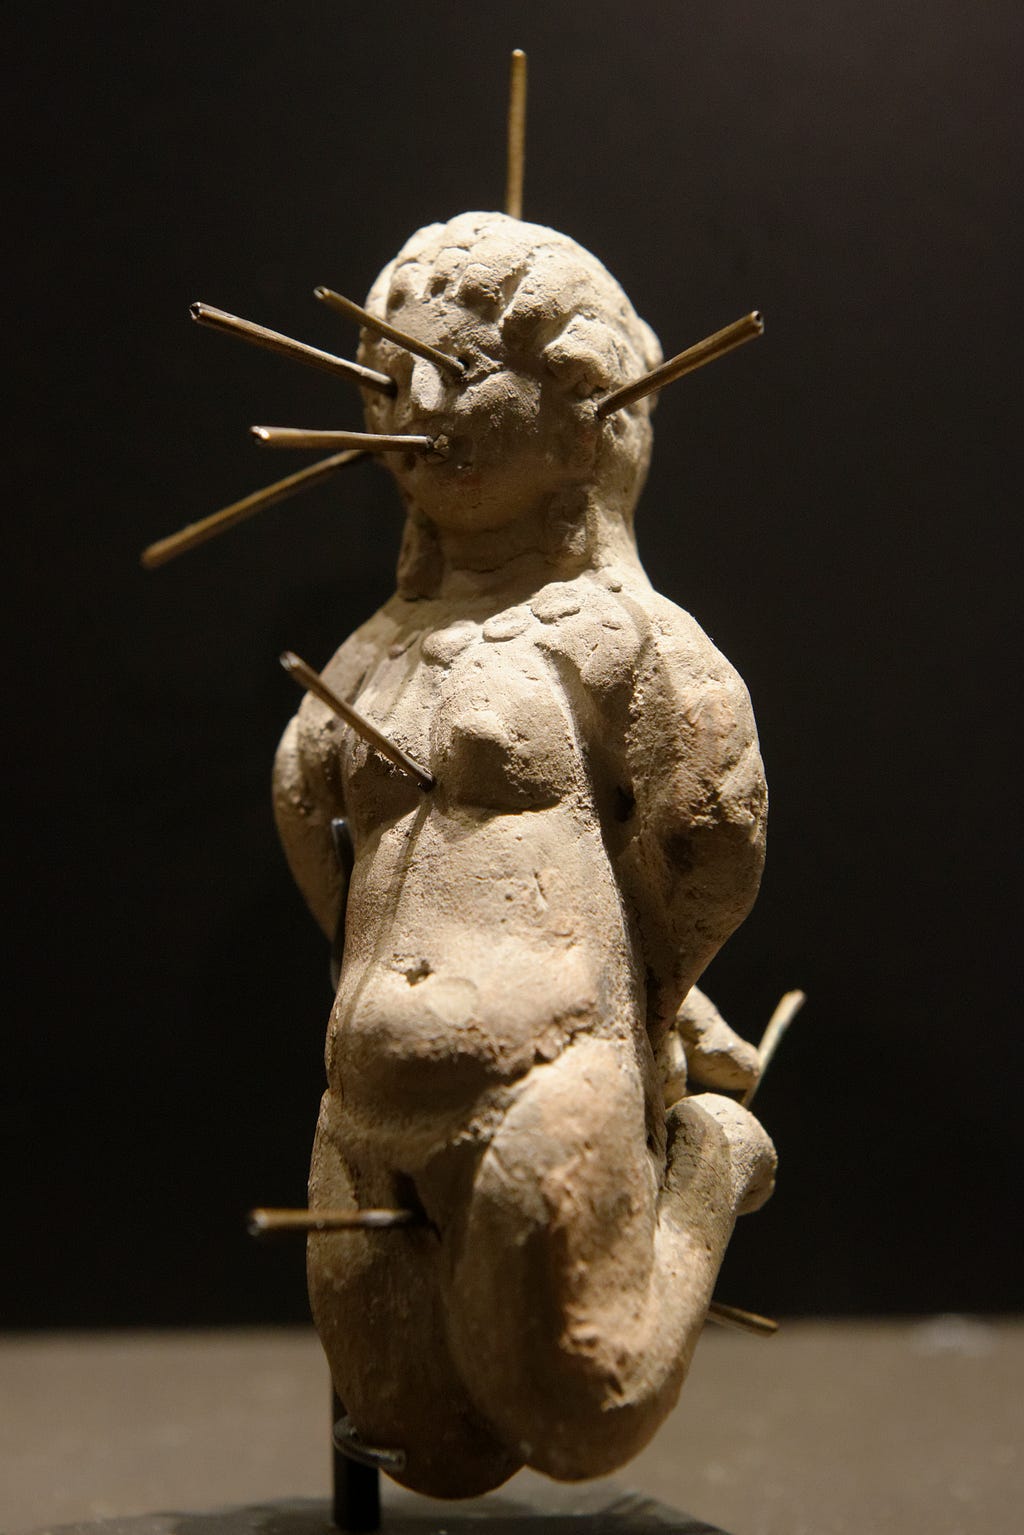 A clay figure is depicted, bound, pierced with needles.